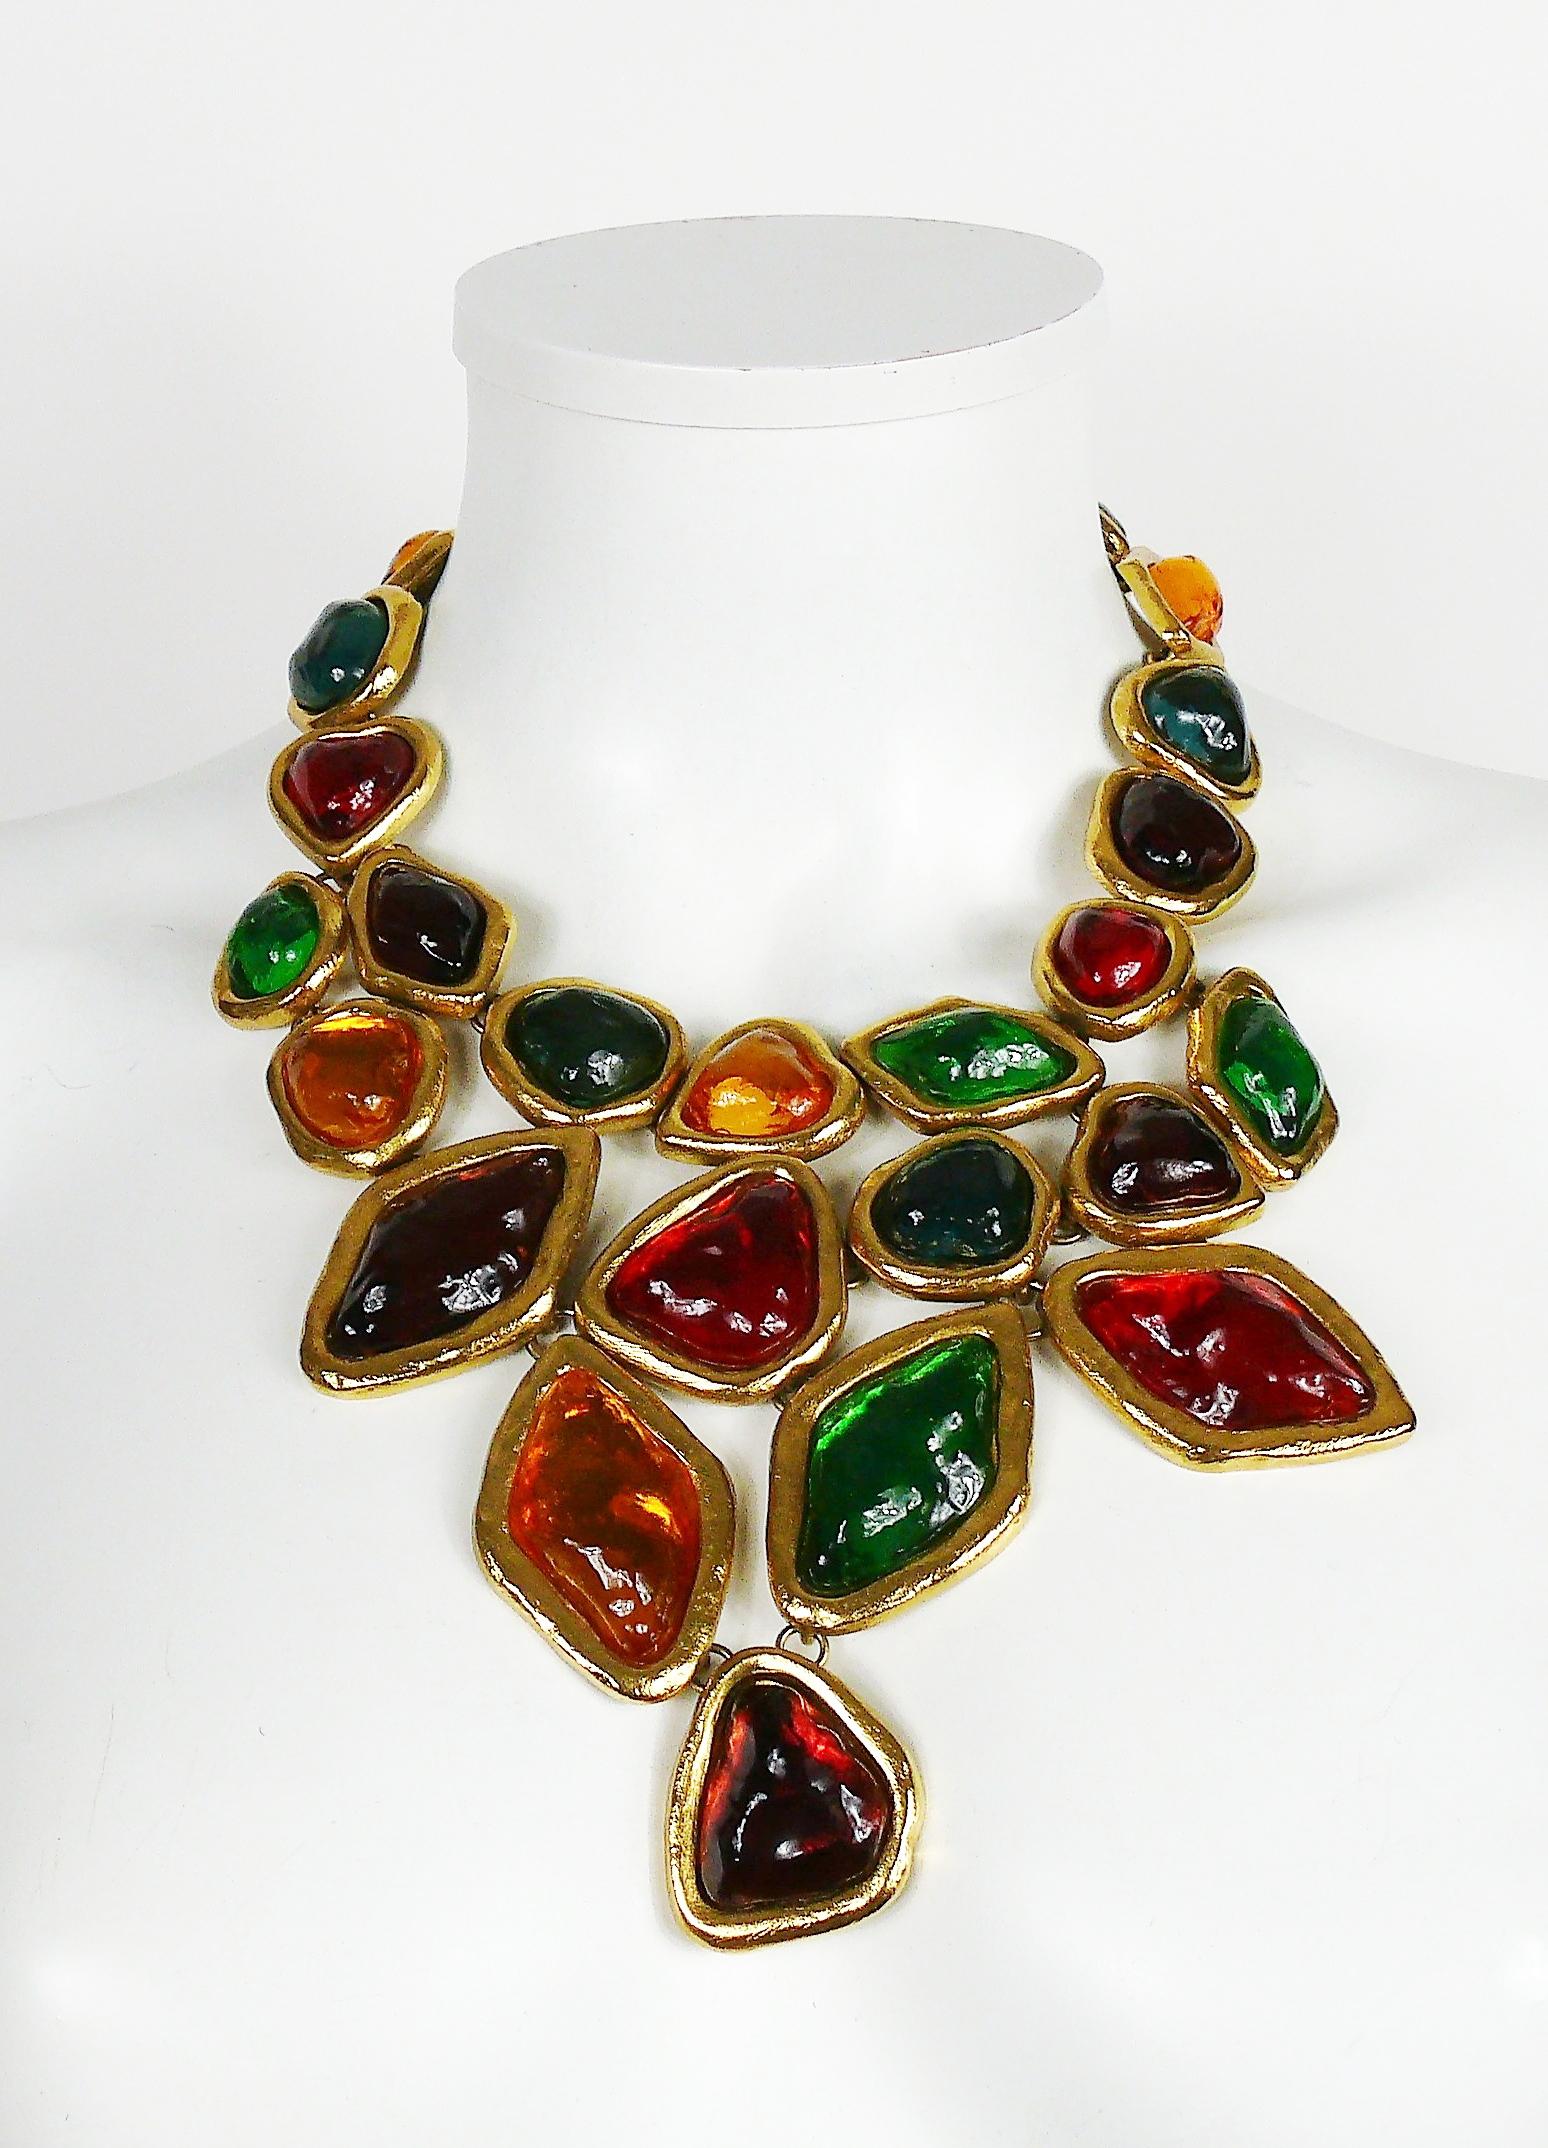 YVES SAINT LAURENT dramatic multi jewelled plastron necklace and earring set featuring vibrant multi colour poured resin stones and cabochons in a gold toned setting.

One of the most amazing YVES SAINT LAURENT costume jewelry set